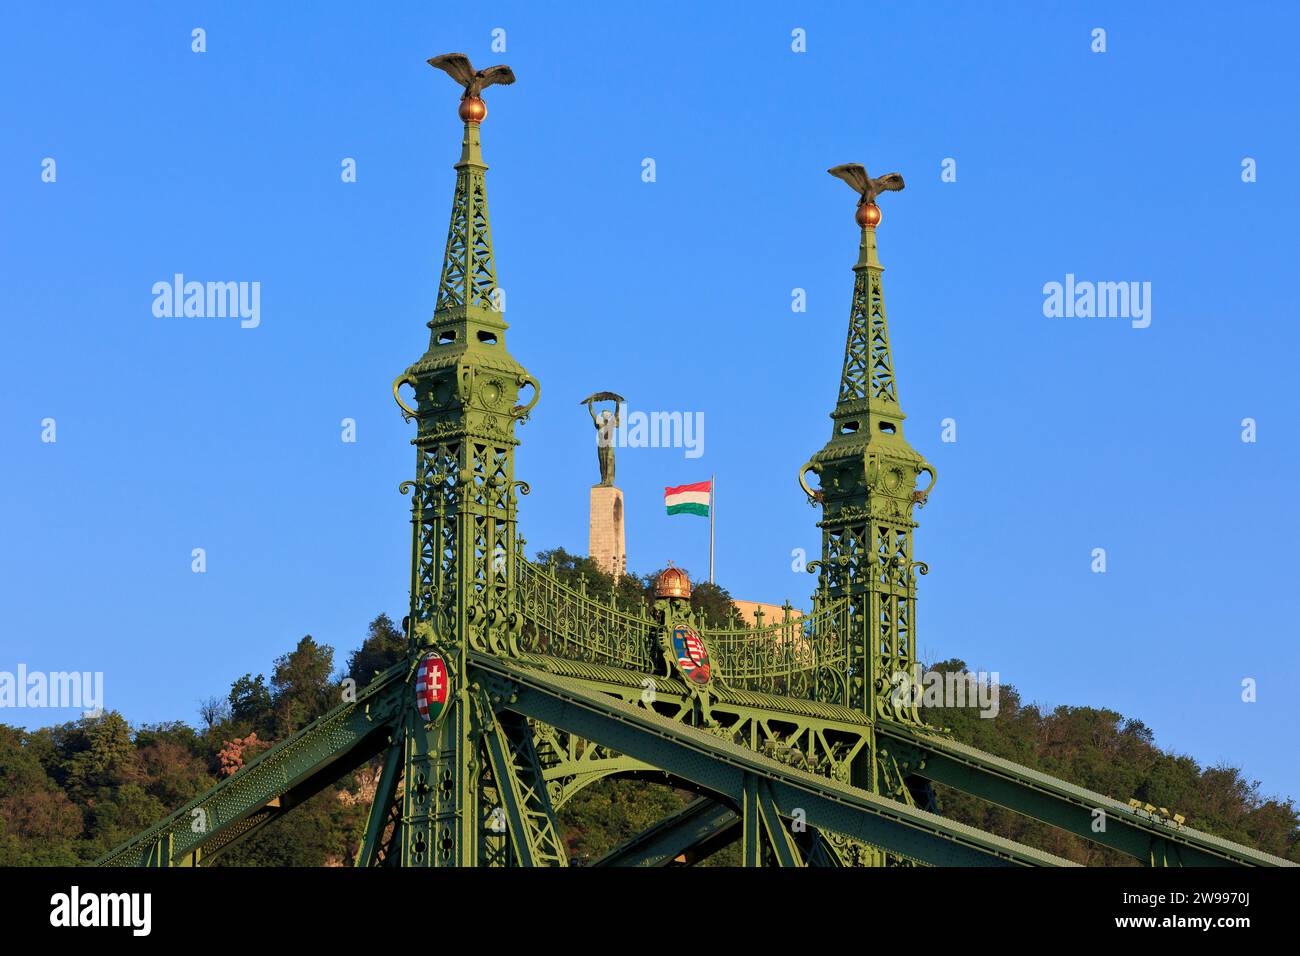 The Liberty Bridge (Szabadsag Hid) with the Liberty Statue at the Citadel (Citadella) as a backdrop in Budapest, Hungary Stock Photo